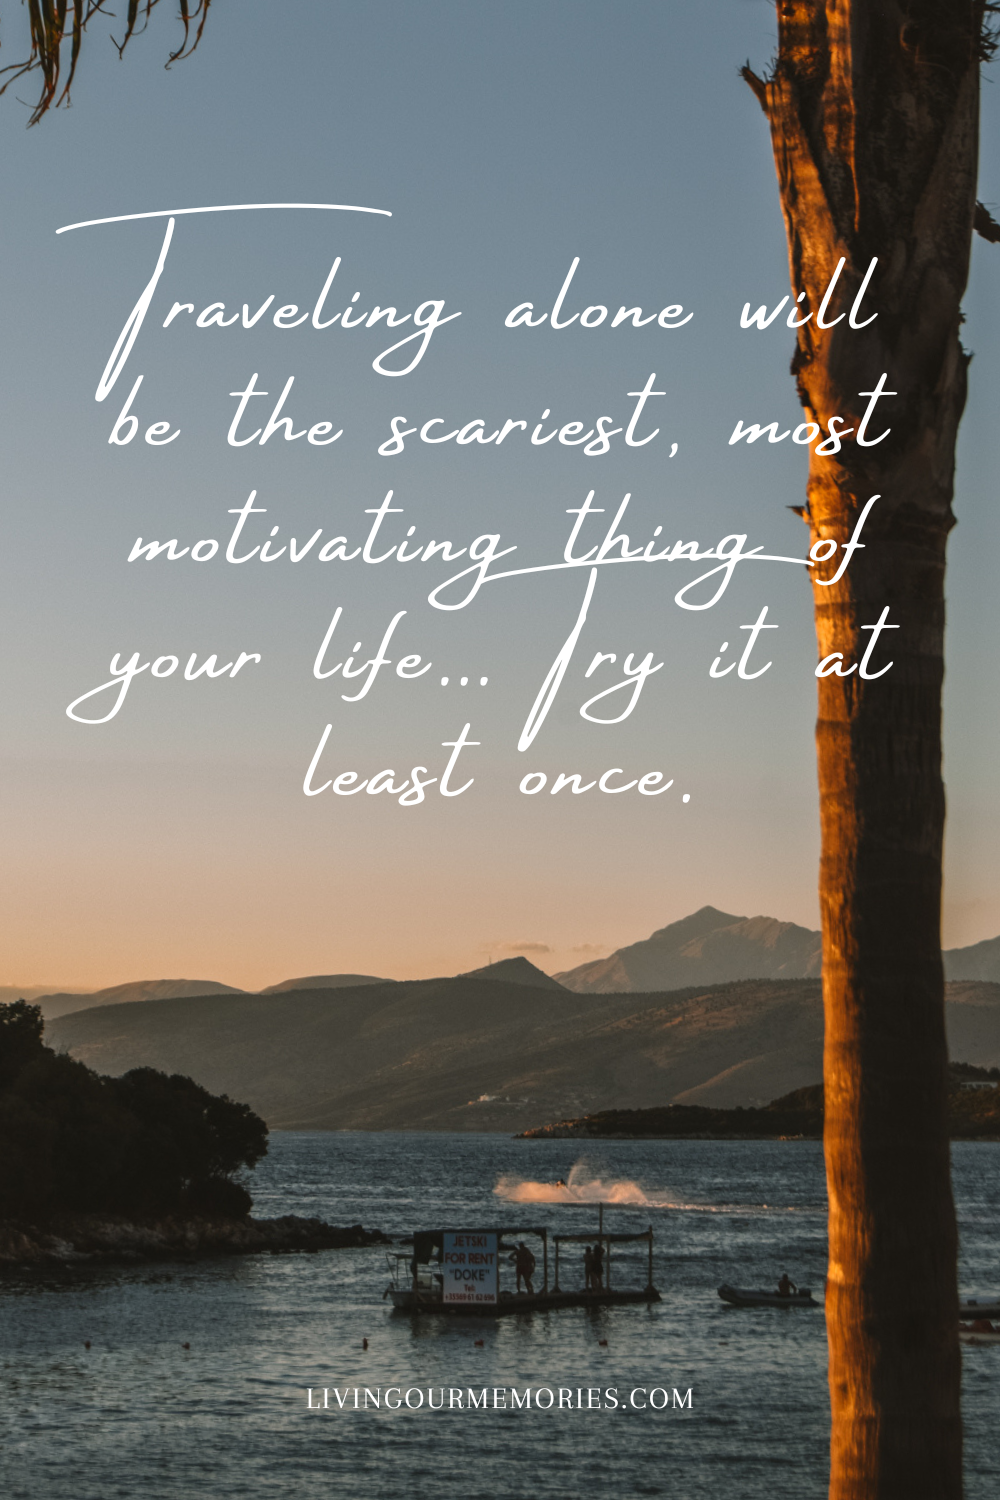 Travelling alone will be the scariest, most motivating thing if your life...  try it at least once - alone quote for Instagram